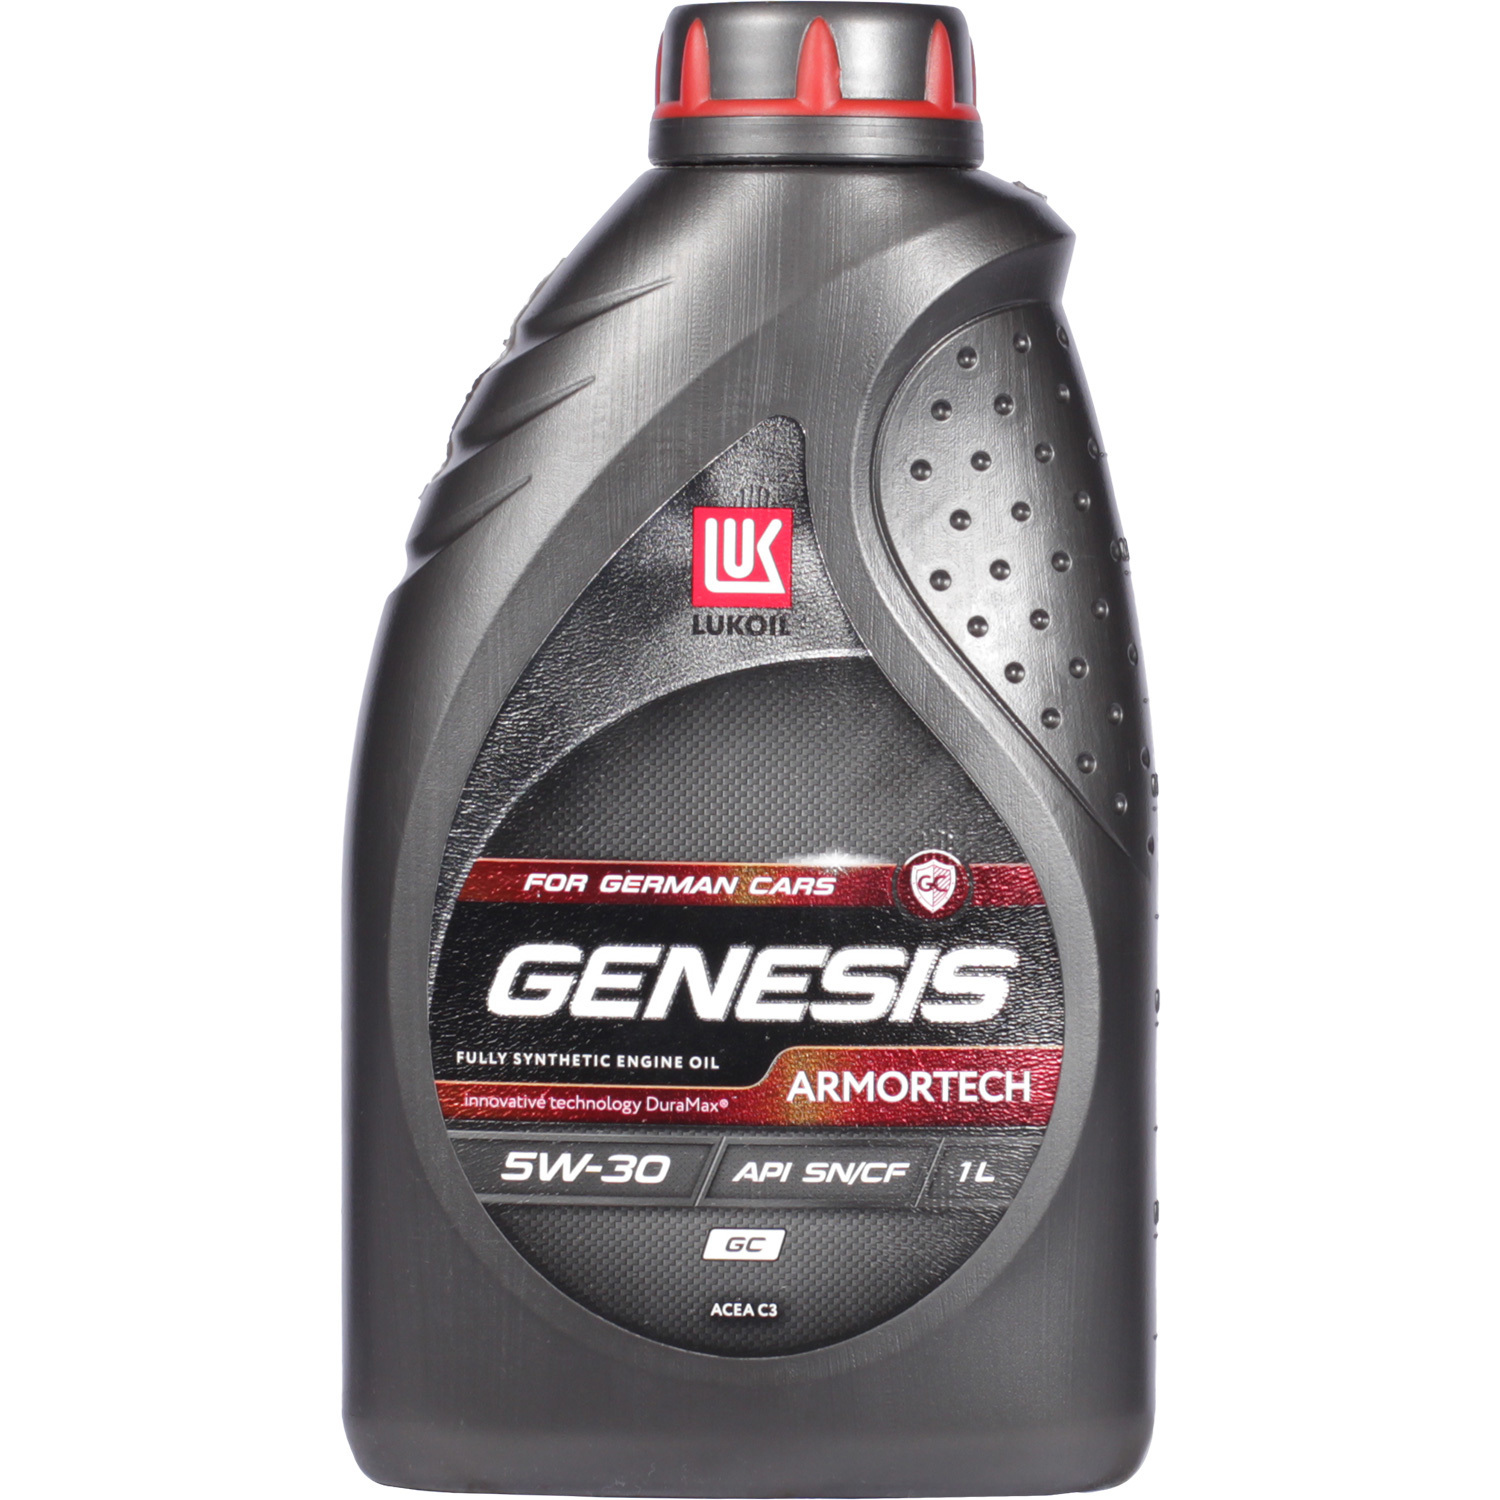 Lukoil Моторное масло Lukoil Genesis Armortech GC 5W-30, 1 л lukoil моторное масло lukoil genesis armortech diesel 5w 30 4 л